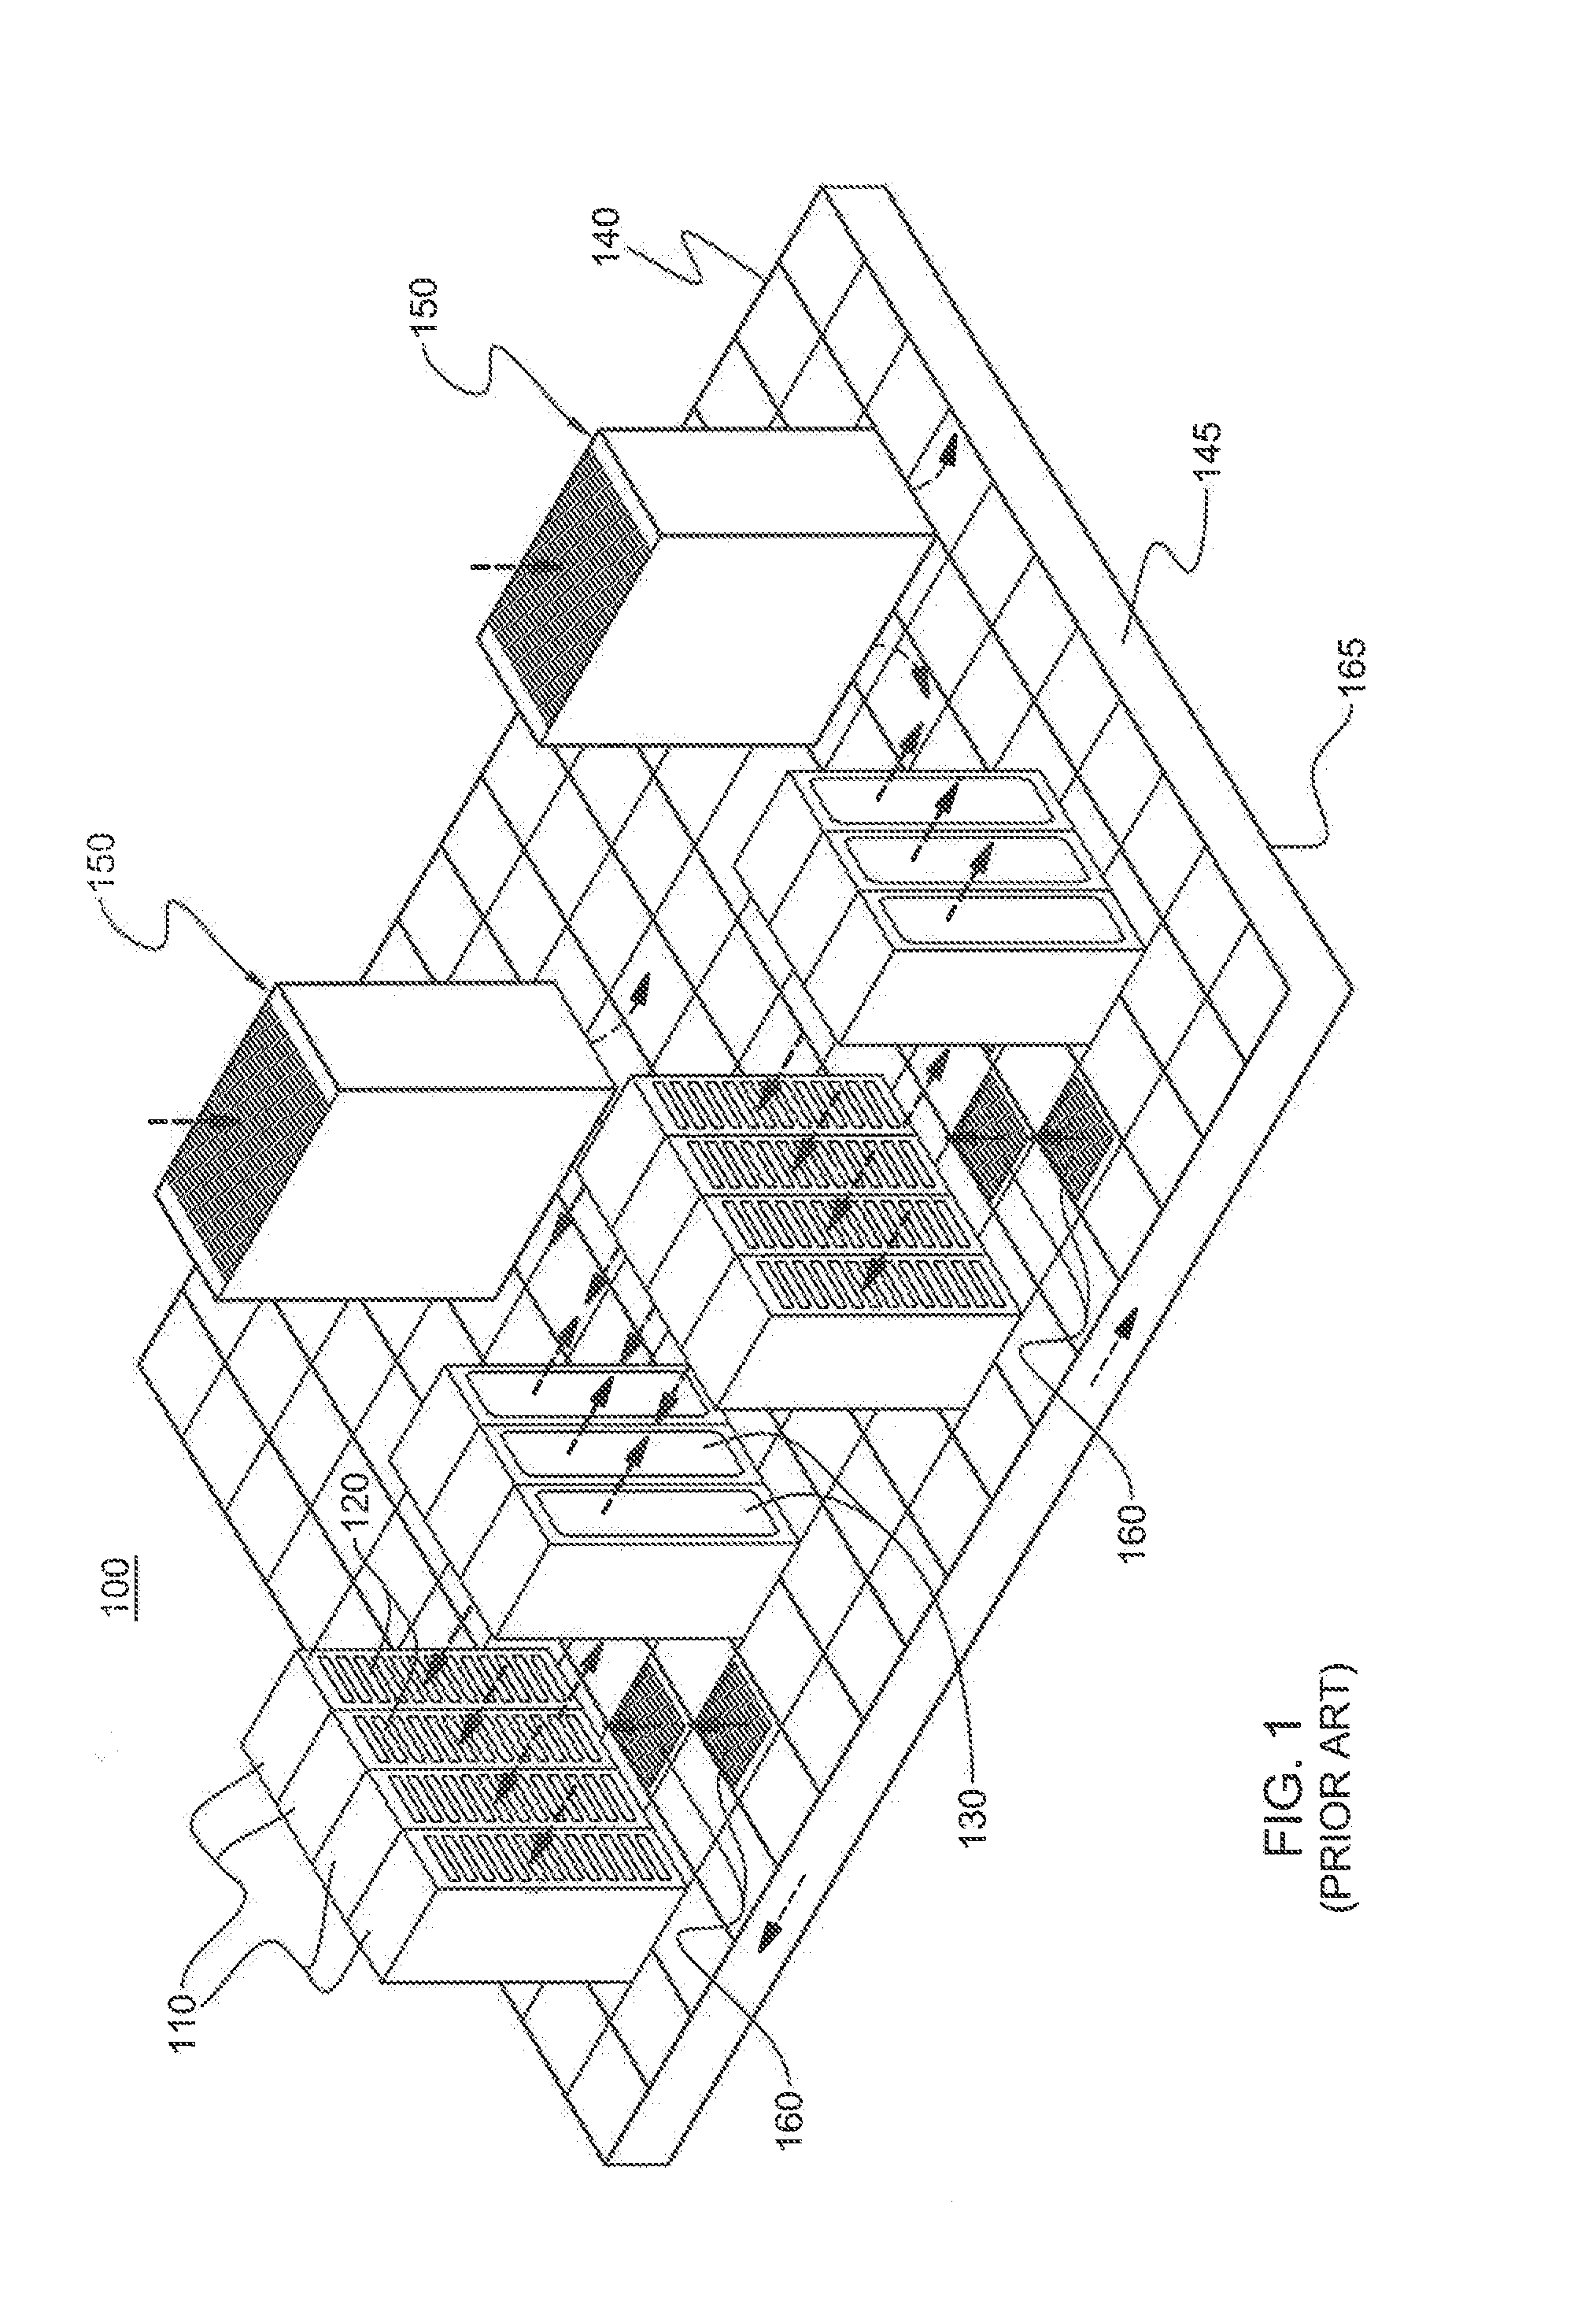 Thermoelectric-enhanced, vapor-compression refrigeration apparatus facilitating cooling of an electronic component